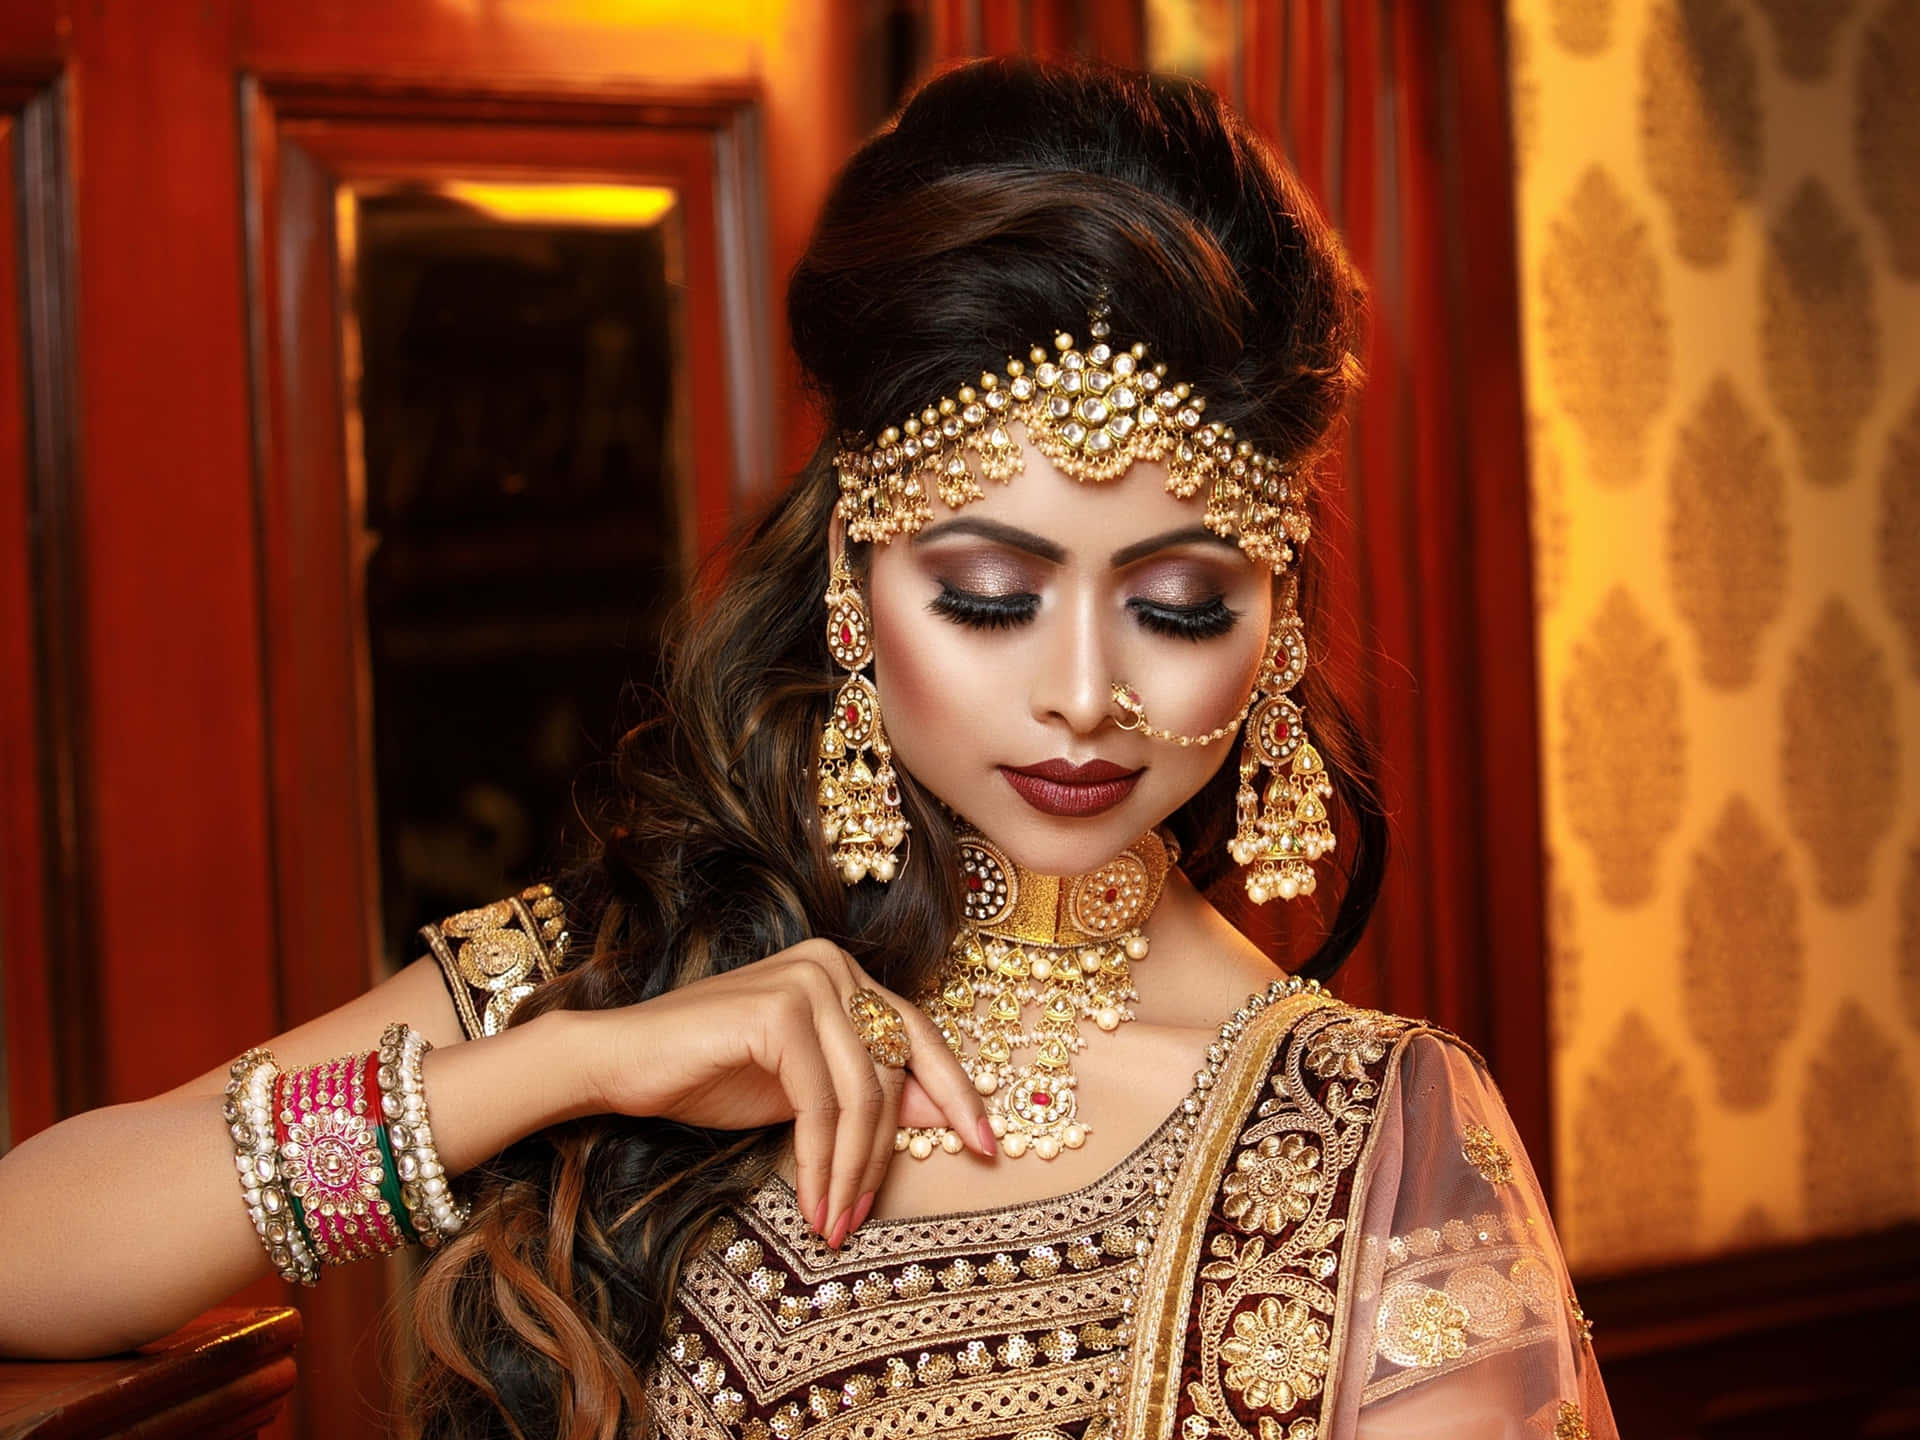 A Beautiful Woman In A Traditional Indian Outfit